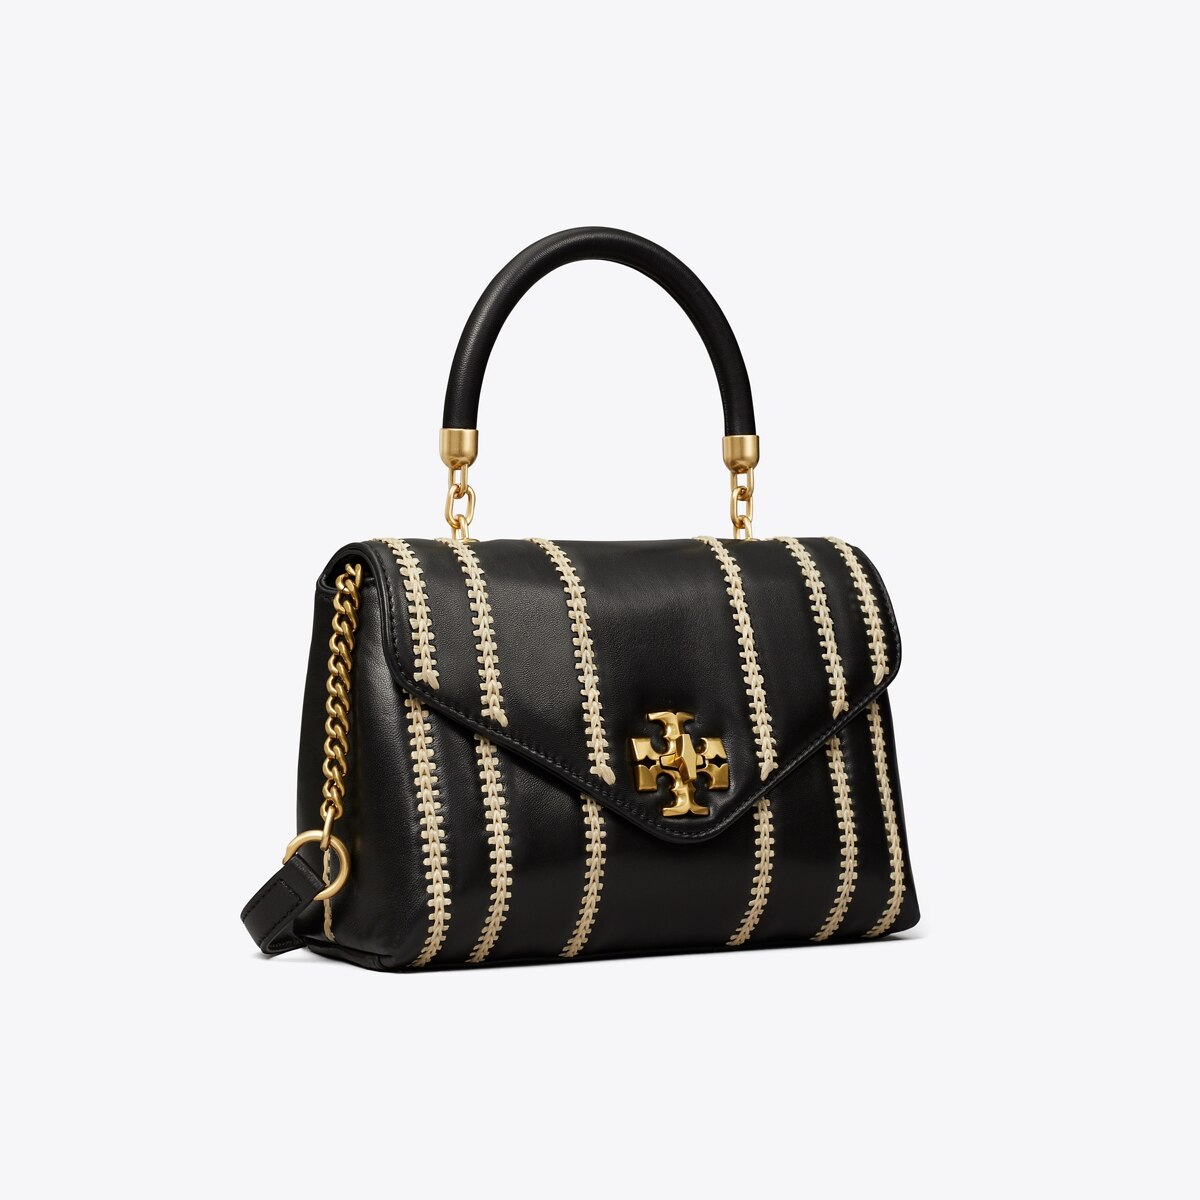 Tory Burch Kira Small Quilted Satchel